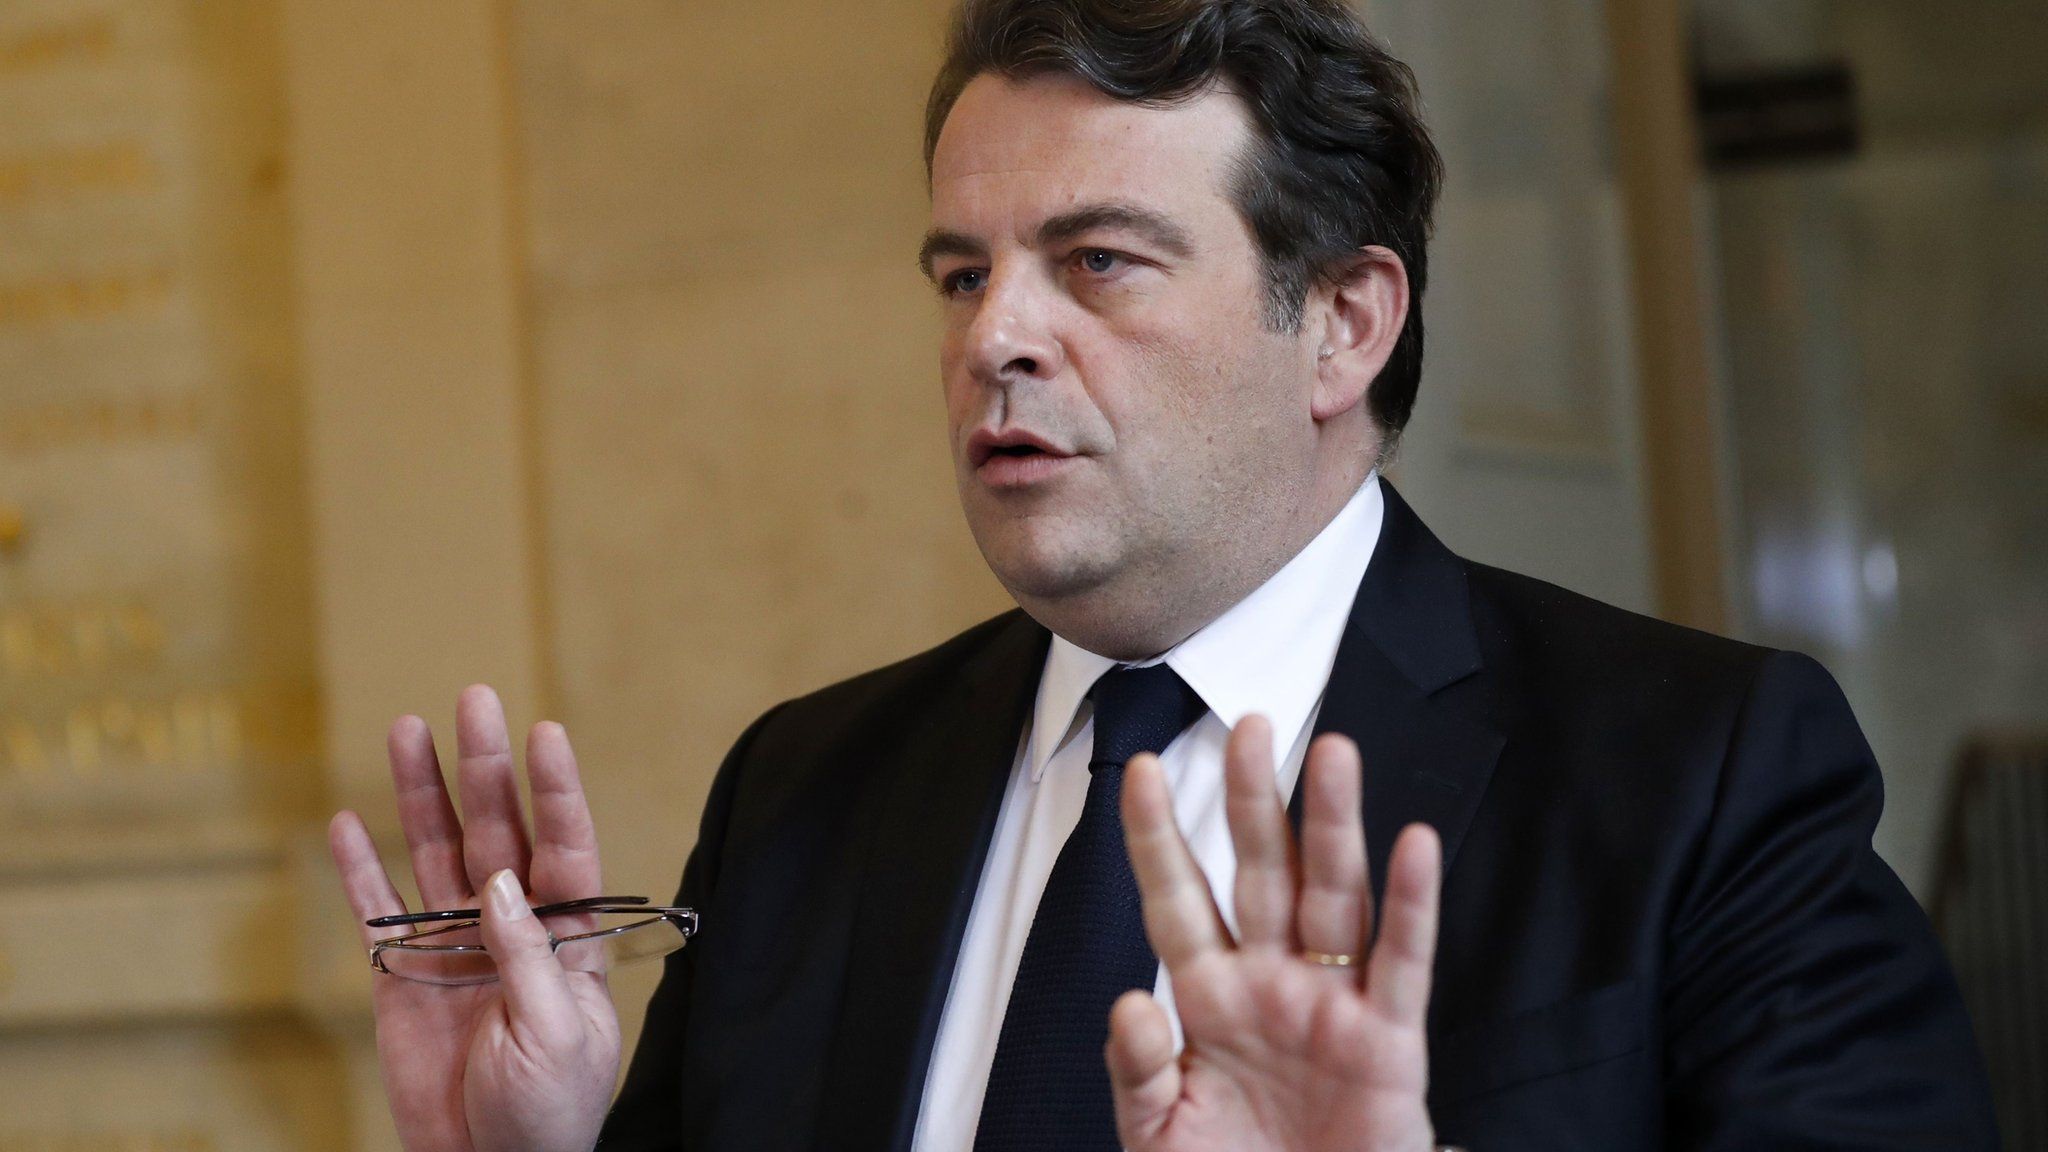 Spokesman for France's centre-right Republicans party, Thierry Solere, answers journalists' questions after a meeting of lawmakers at the French national assembly in Paris on Tuesday